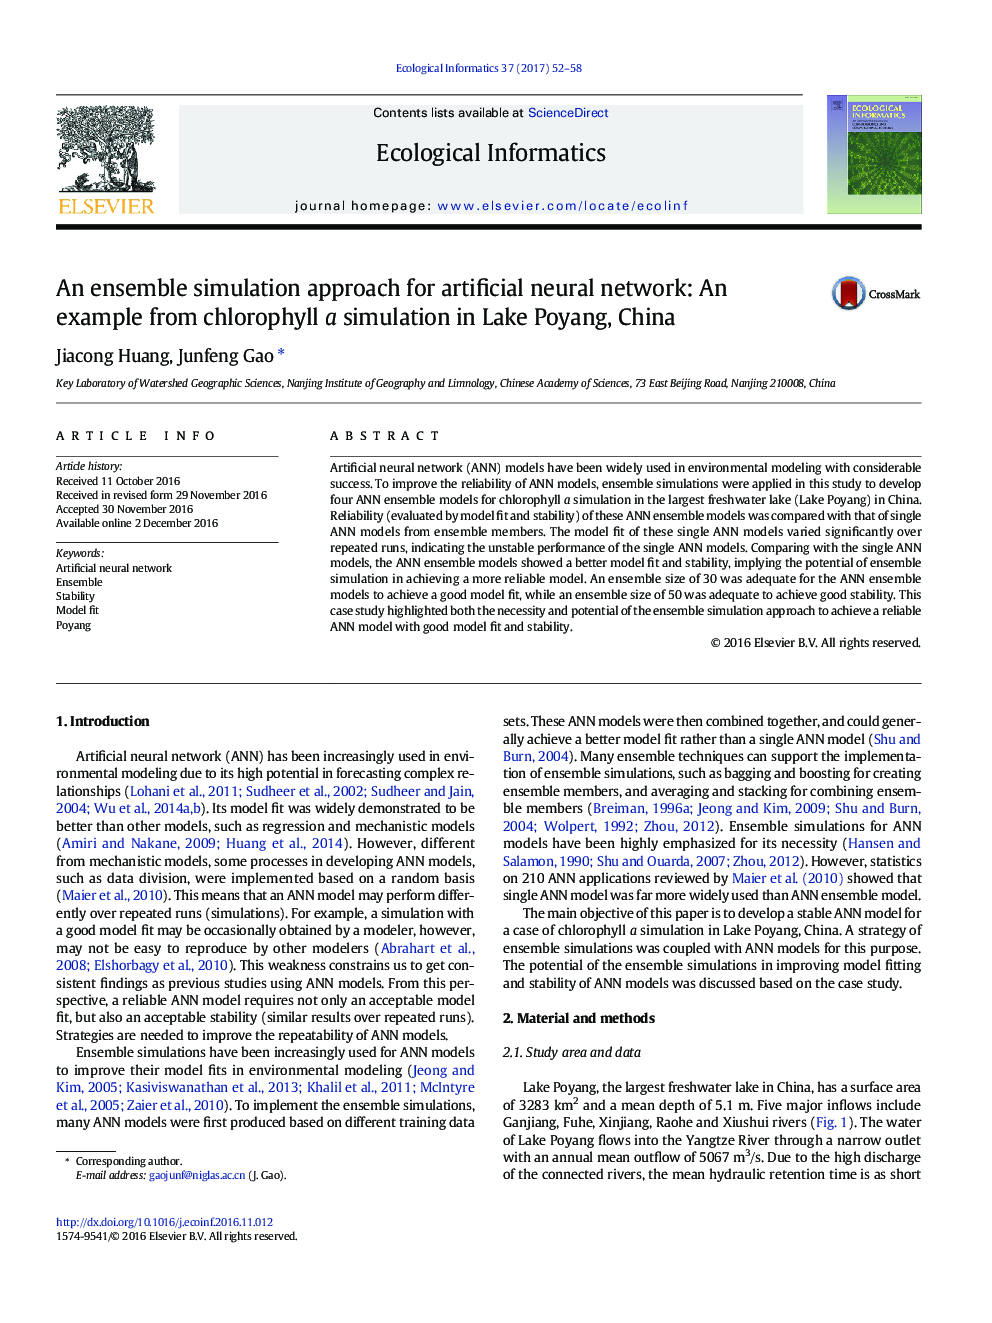 An ensemble simulation approach for artificial neural network: An example from chlorophyll a simulation in Lake Poyang, China